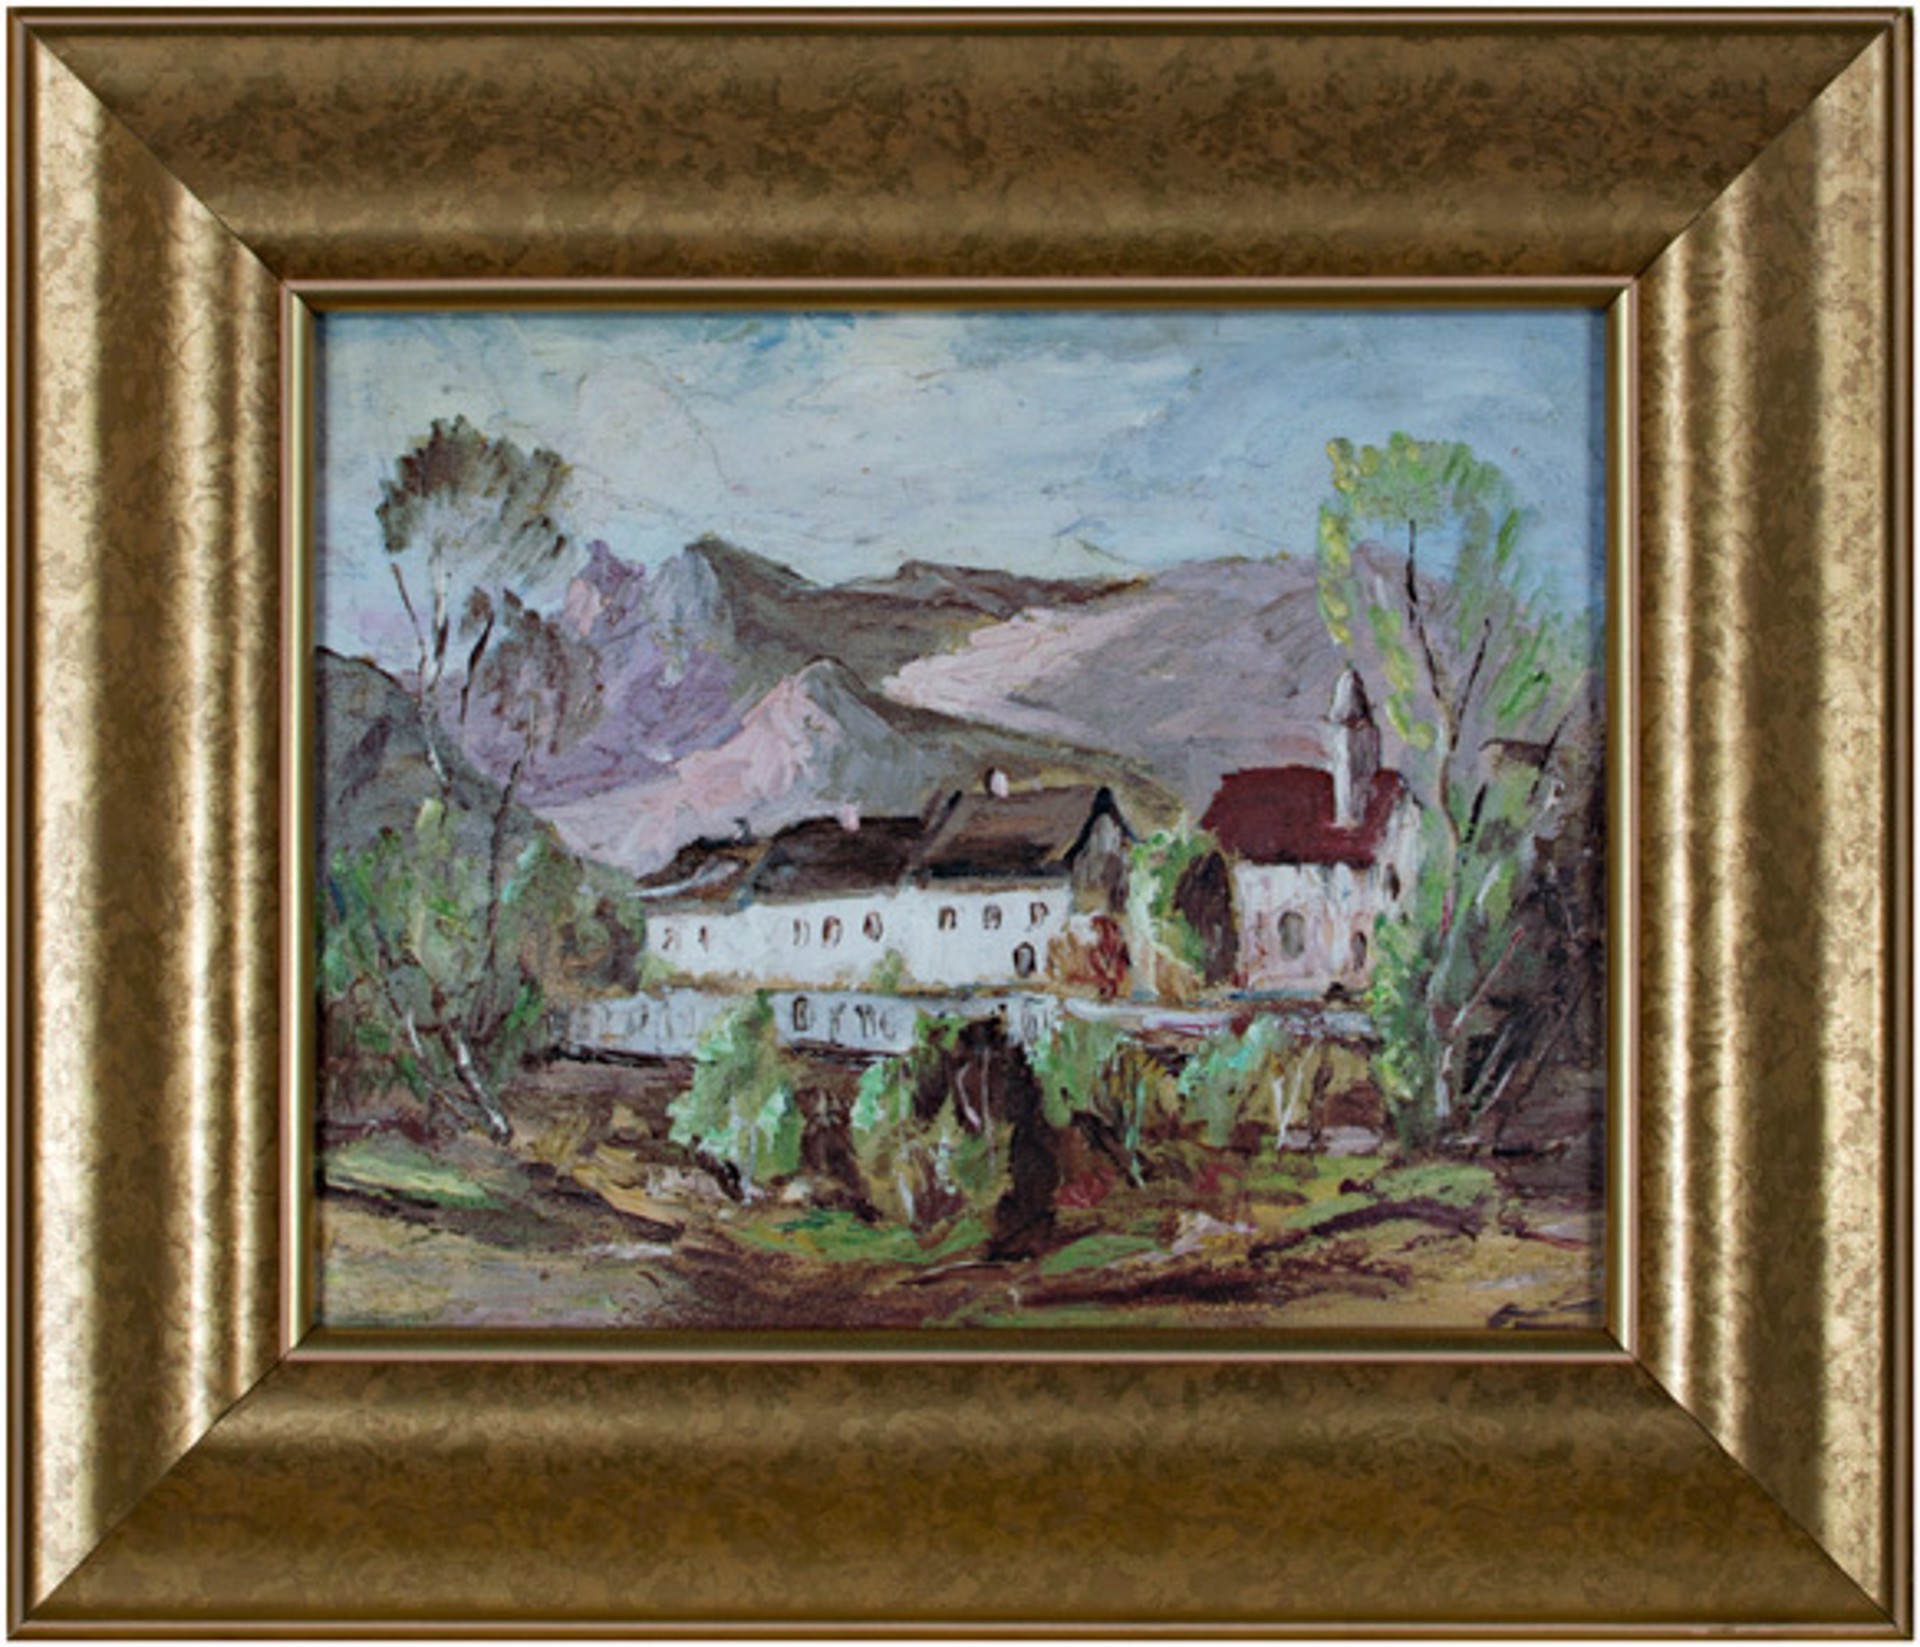 New Mexican Village at Foot of Mountains by Fritzi Brod